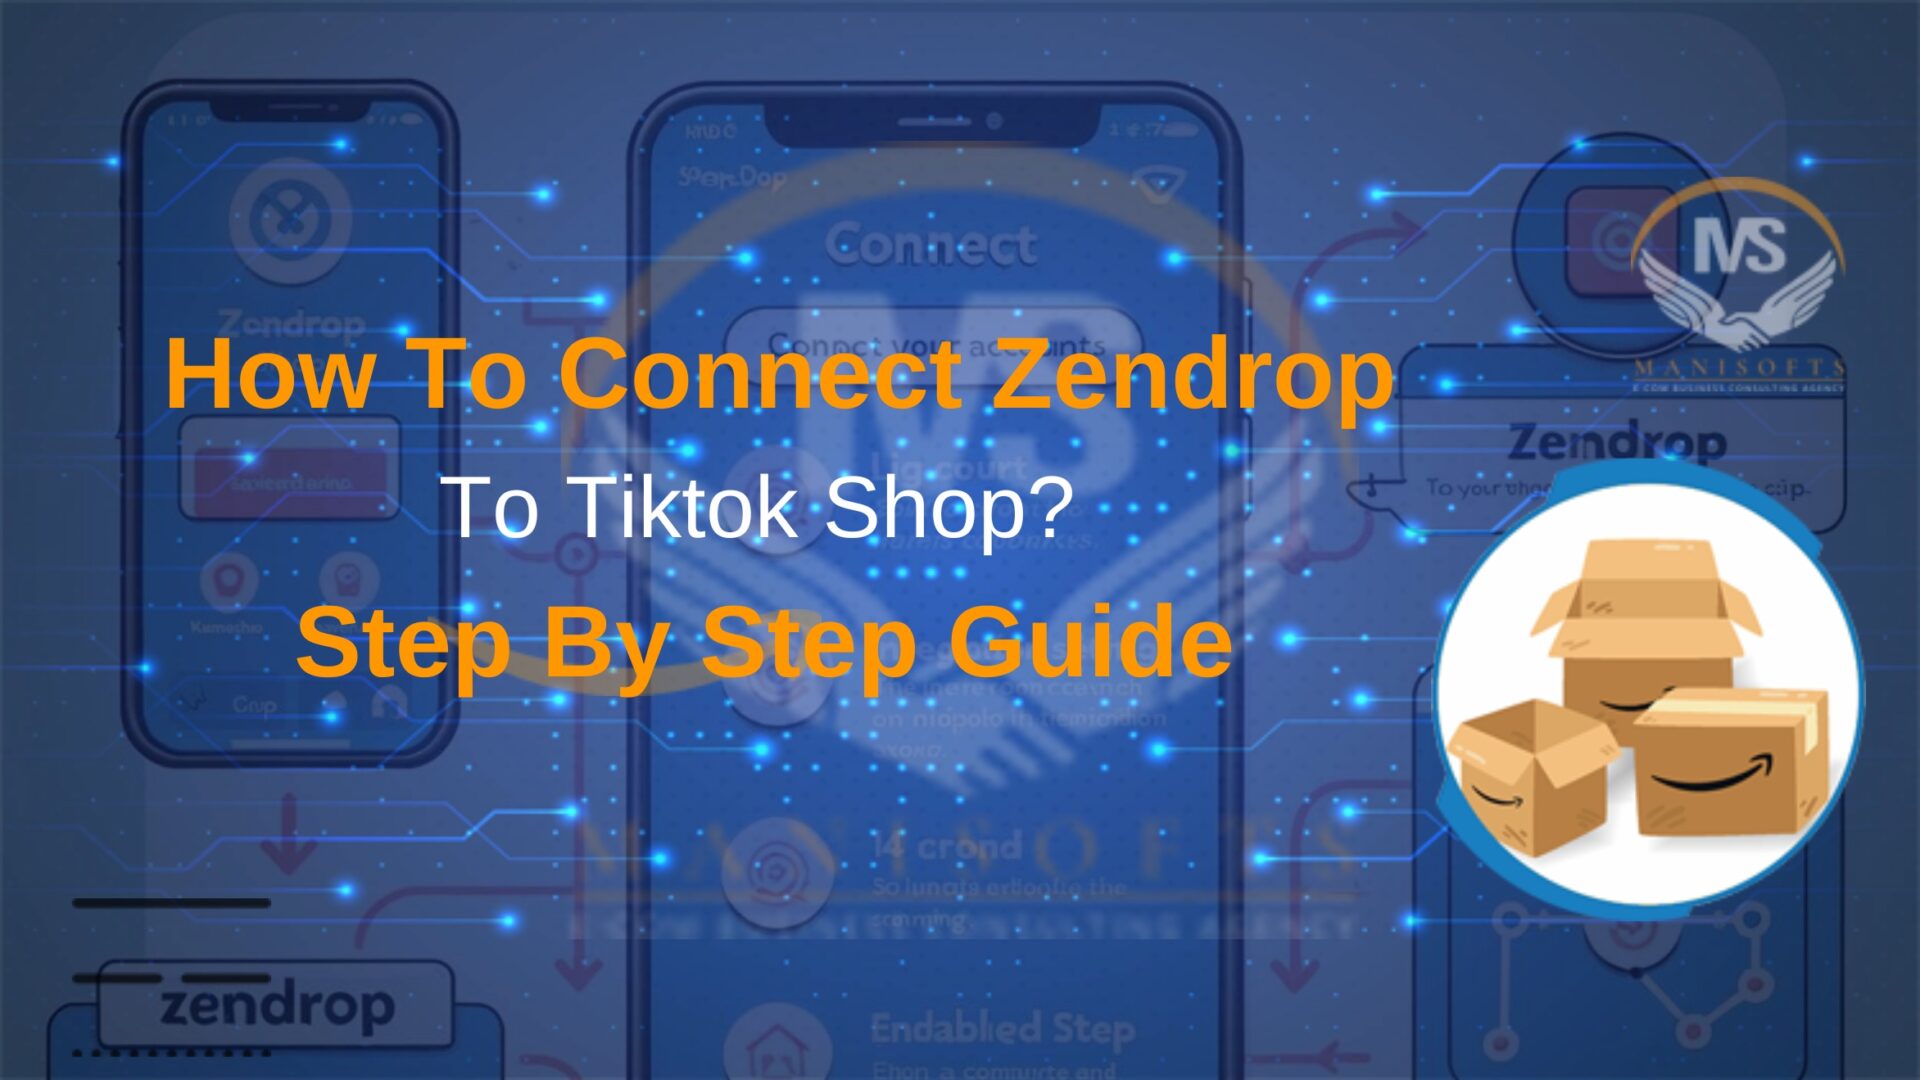 How To Connect Zendrop To Tiktok Shop